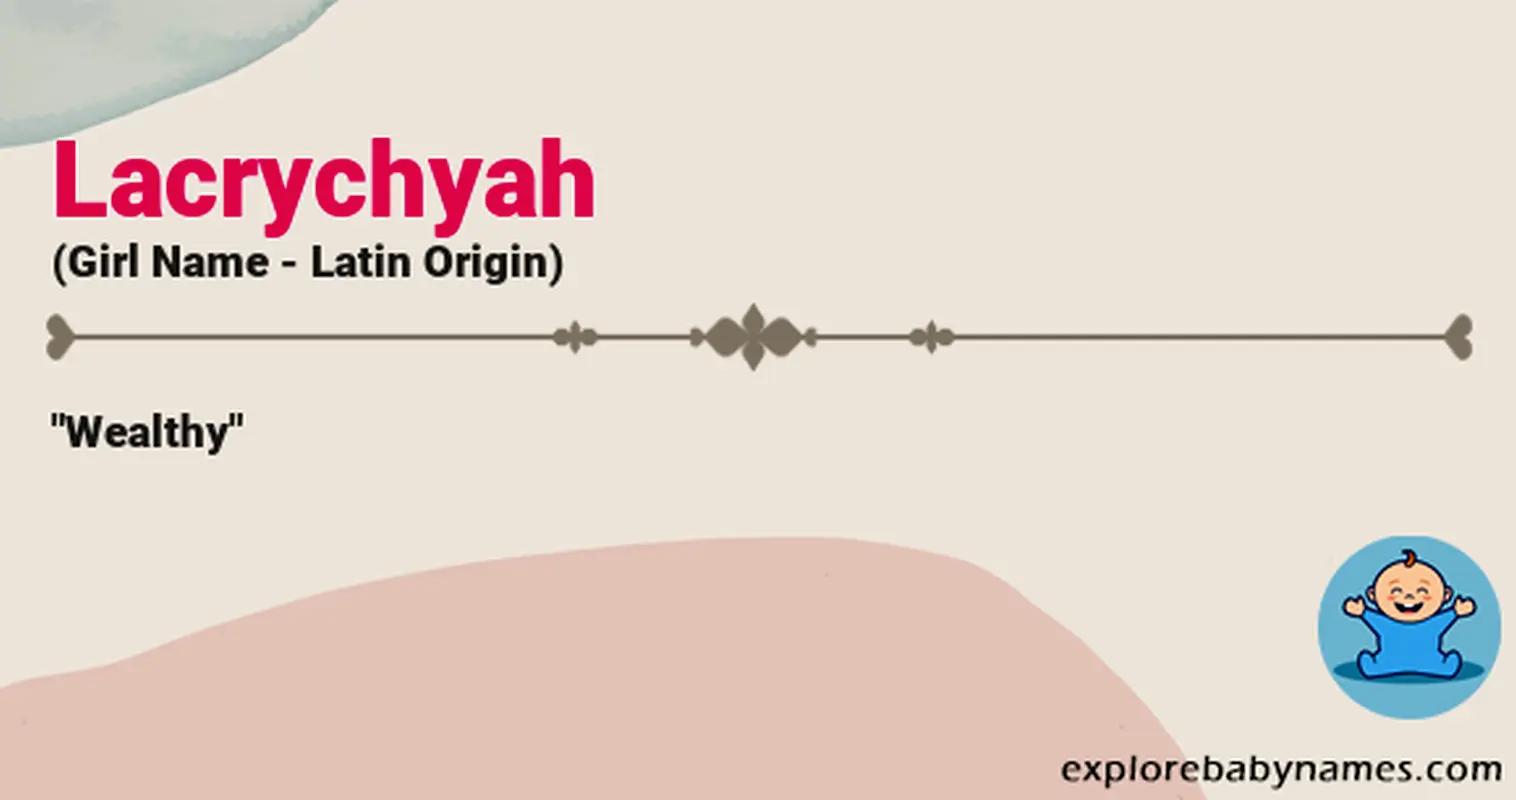 Meaning of Lacrychyah